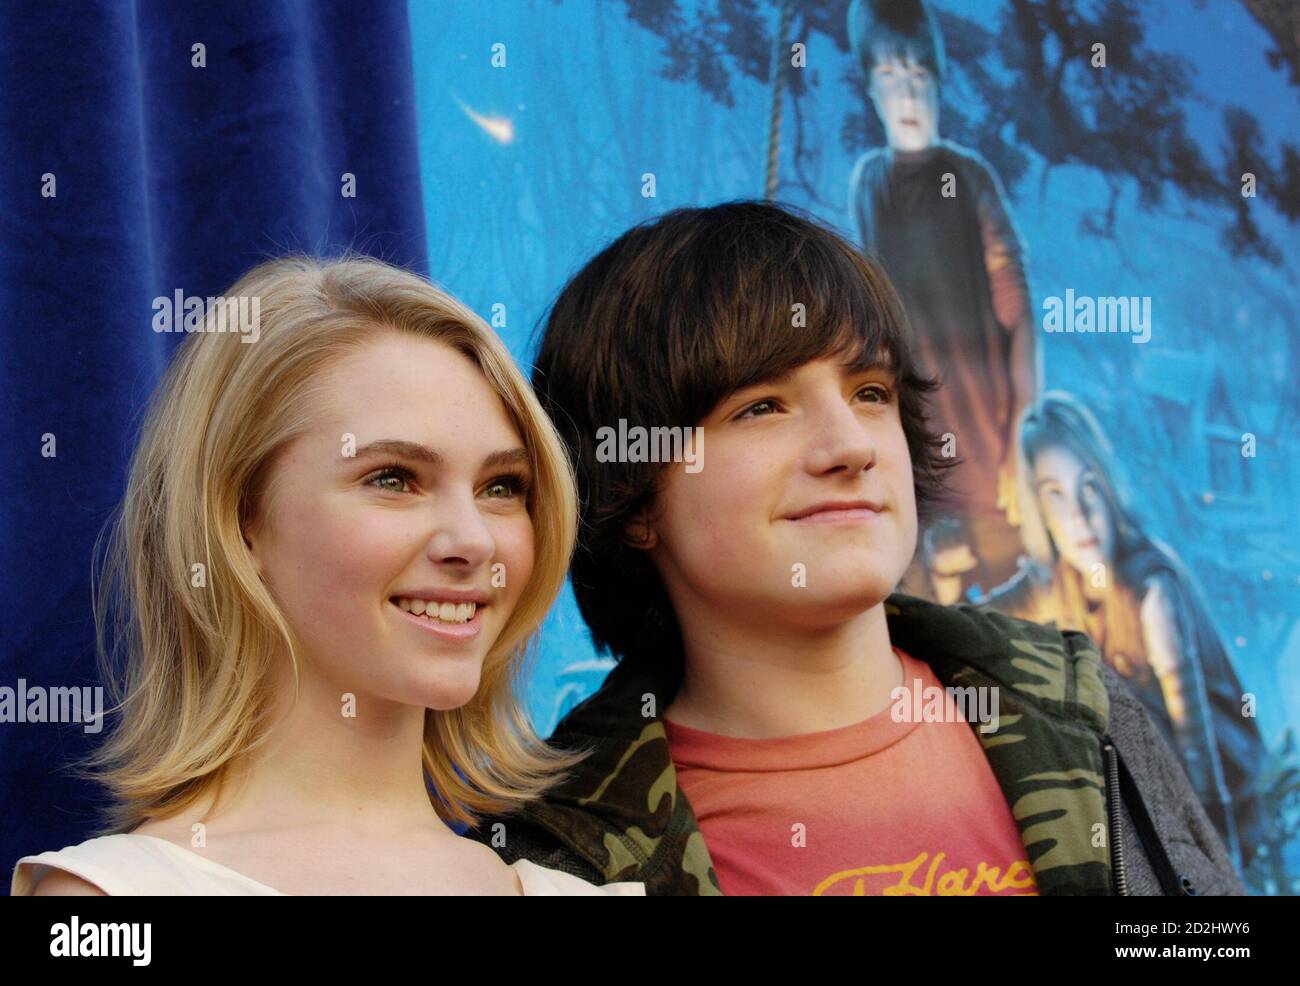 Annasophia Robb L And Josh Hutcherson Cast Members In The New Film Bridge To Terabithia Pose Together At The Premiere Of The Film In Los Angeles February 3 2007 Reuters Chris Pizzello United